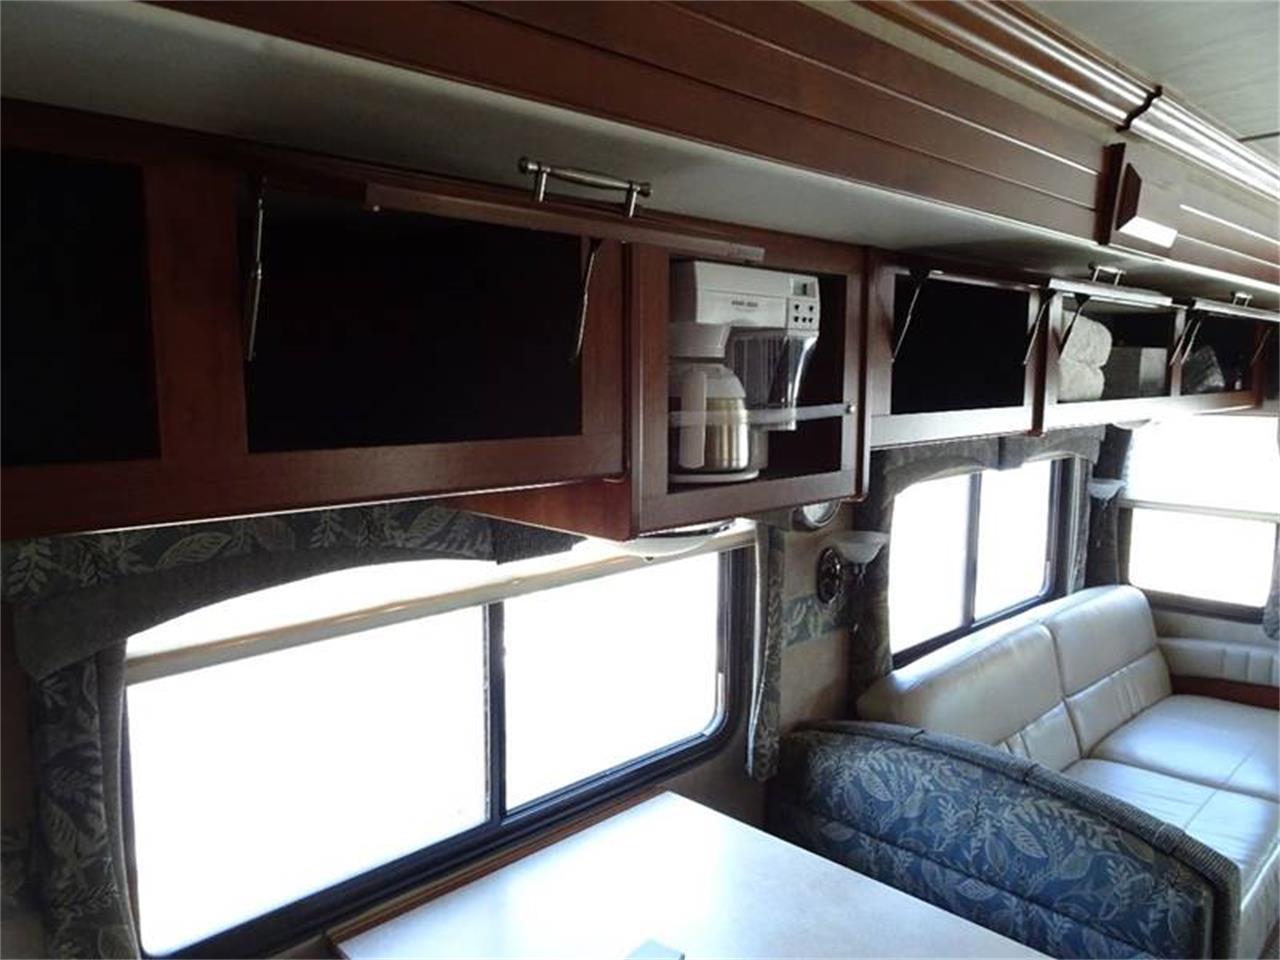 2007 Fleetwood Discovery for sale in Hilton, NY – photo 55